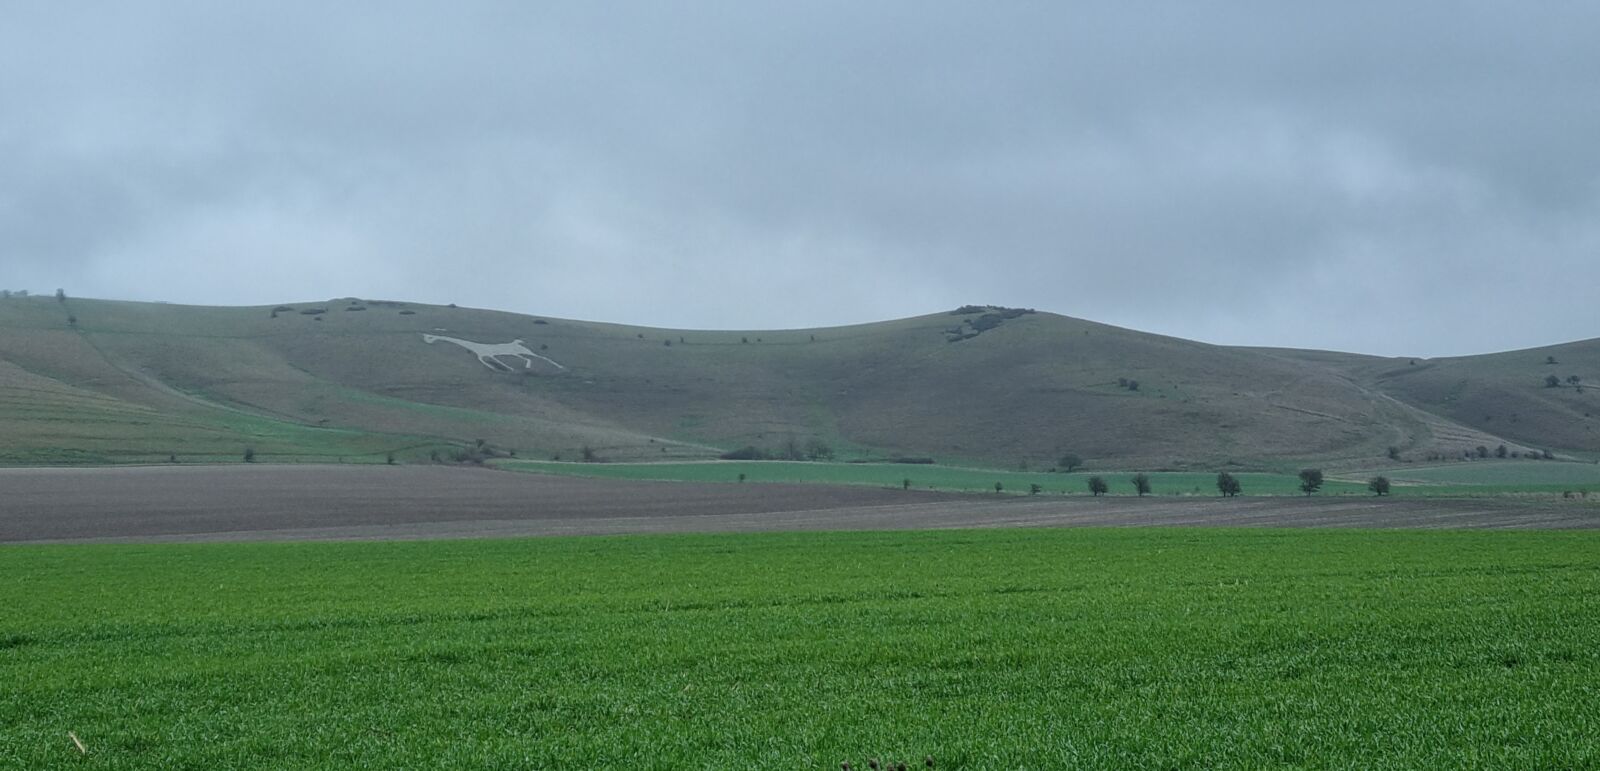 Rolling hills with white horse